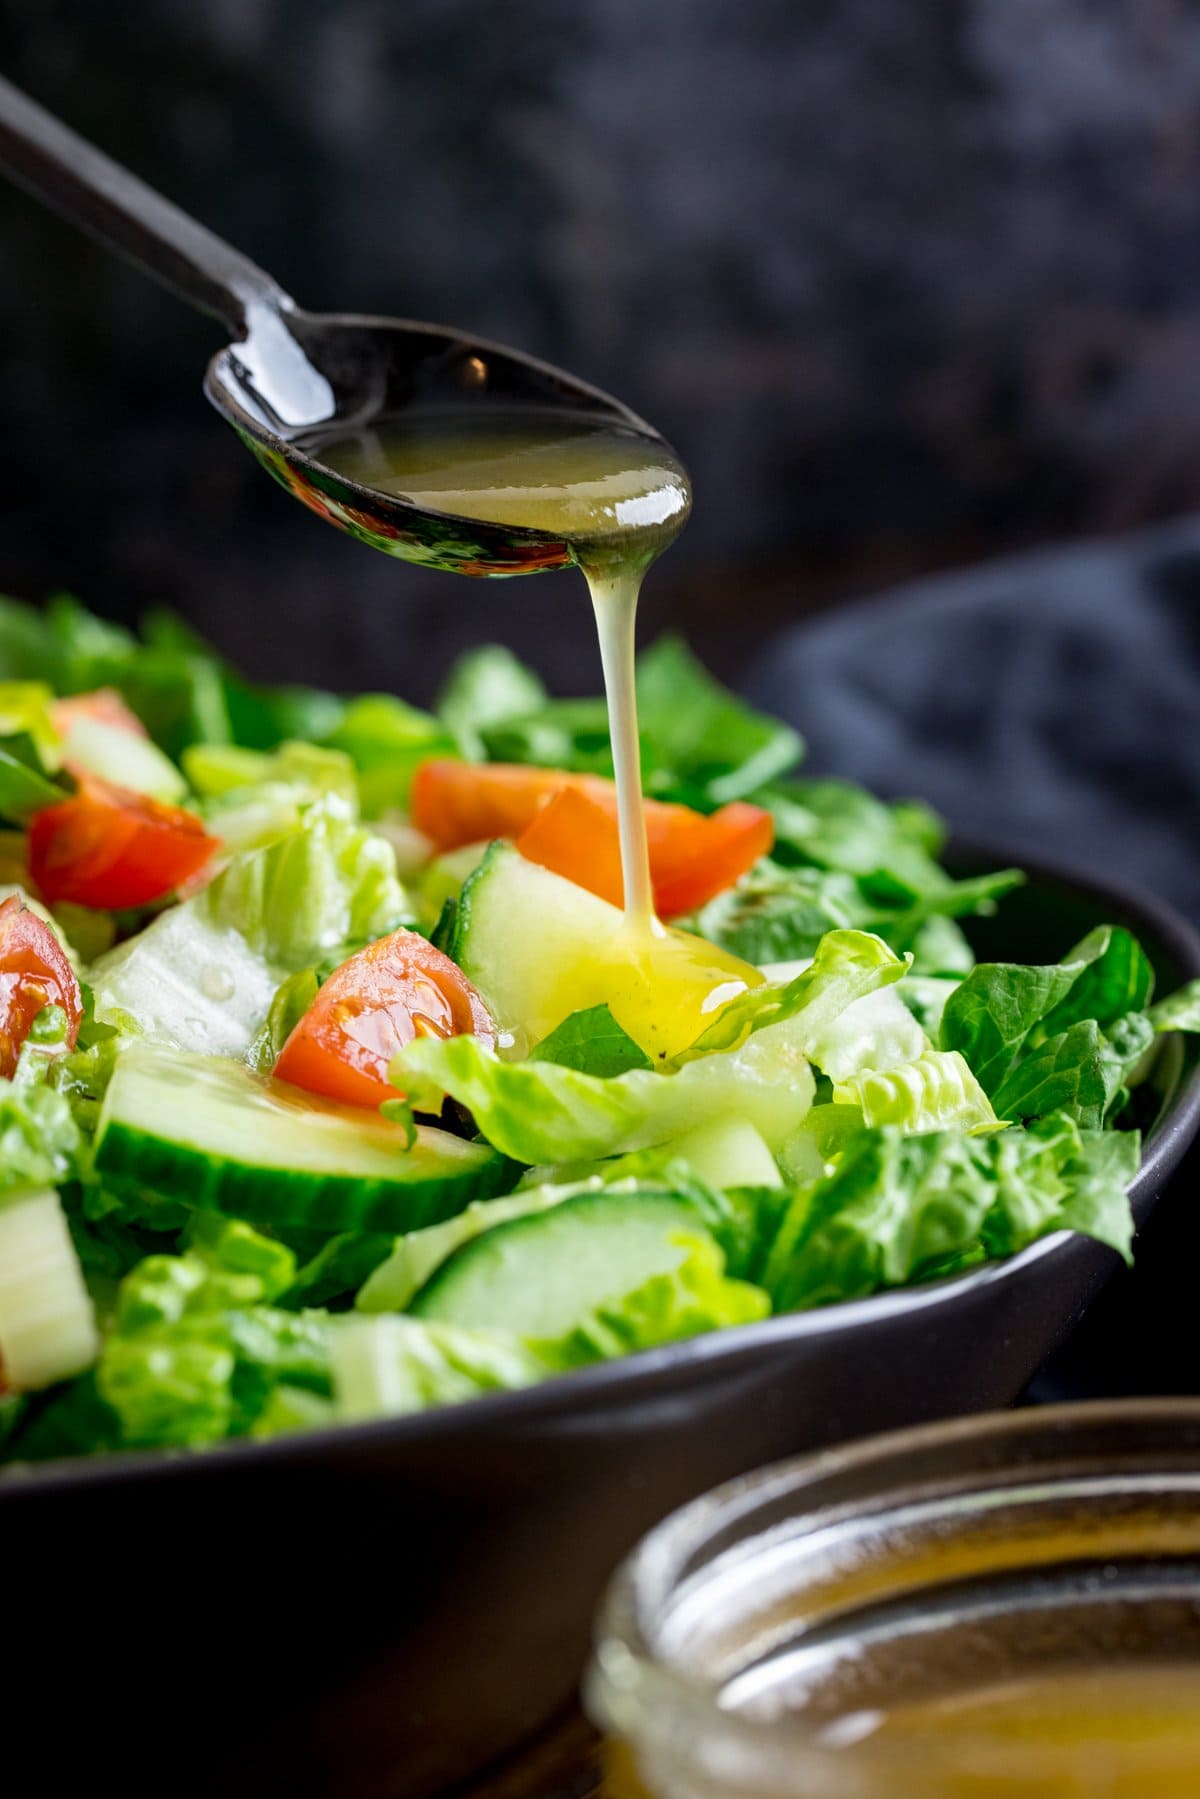 honey mustard salad dressing being poured off a black spoon onto a bowl of salad.